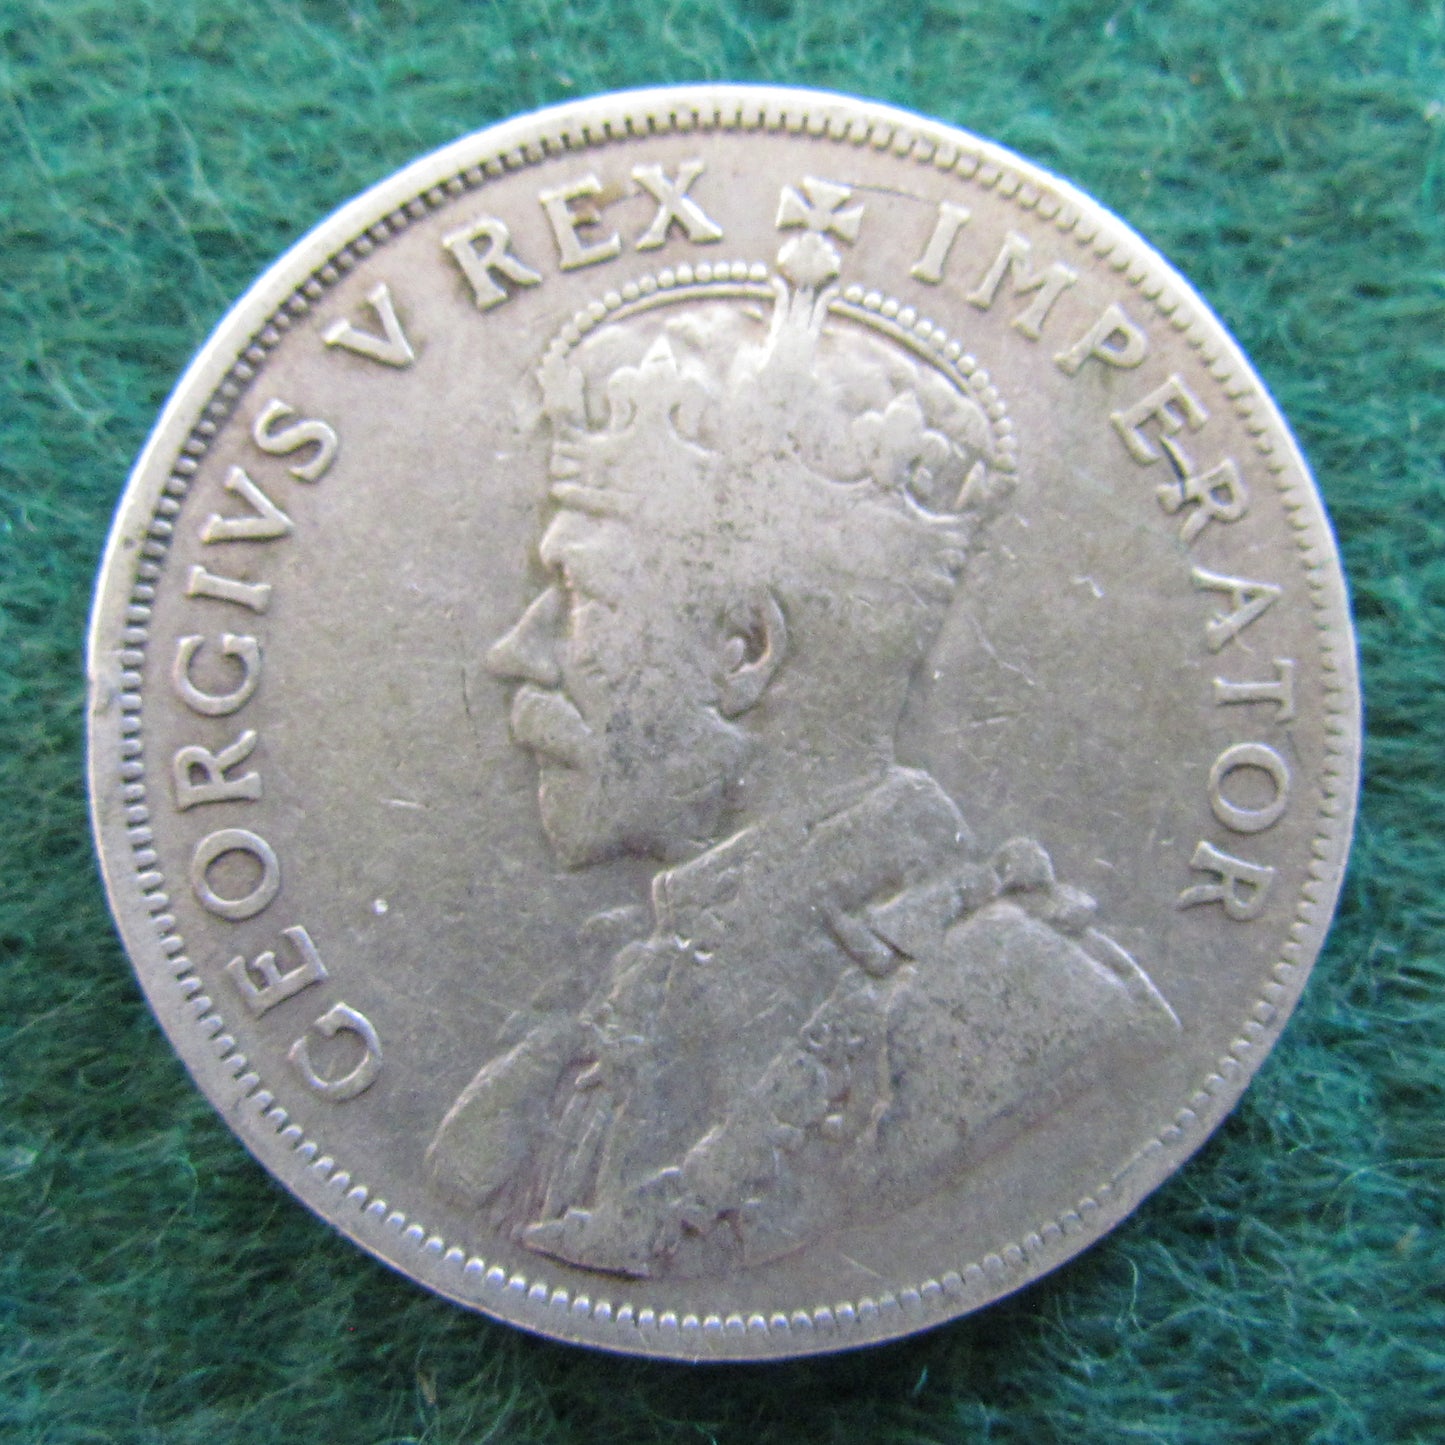 South Africa 1932 2 Shilling Coin King George V